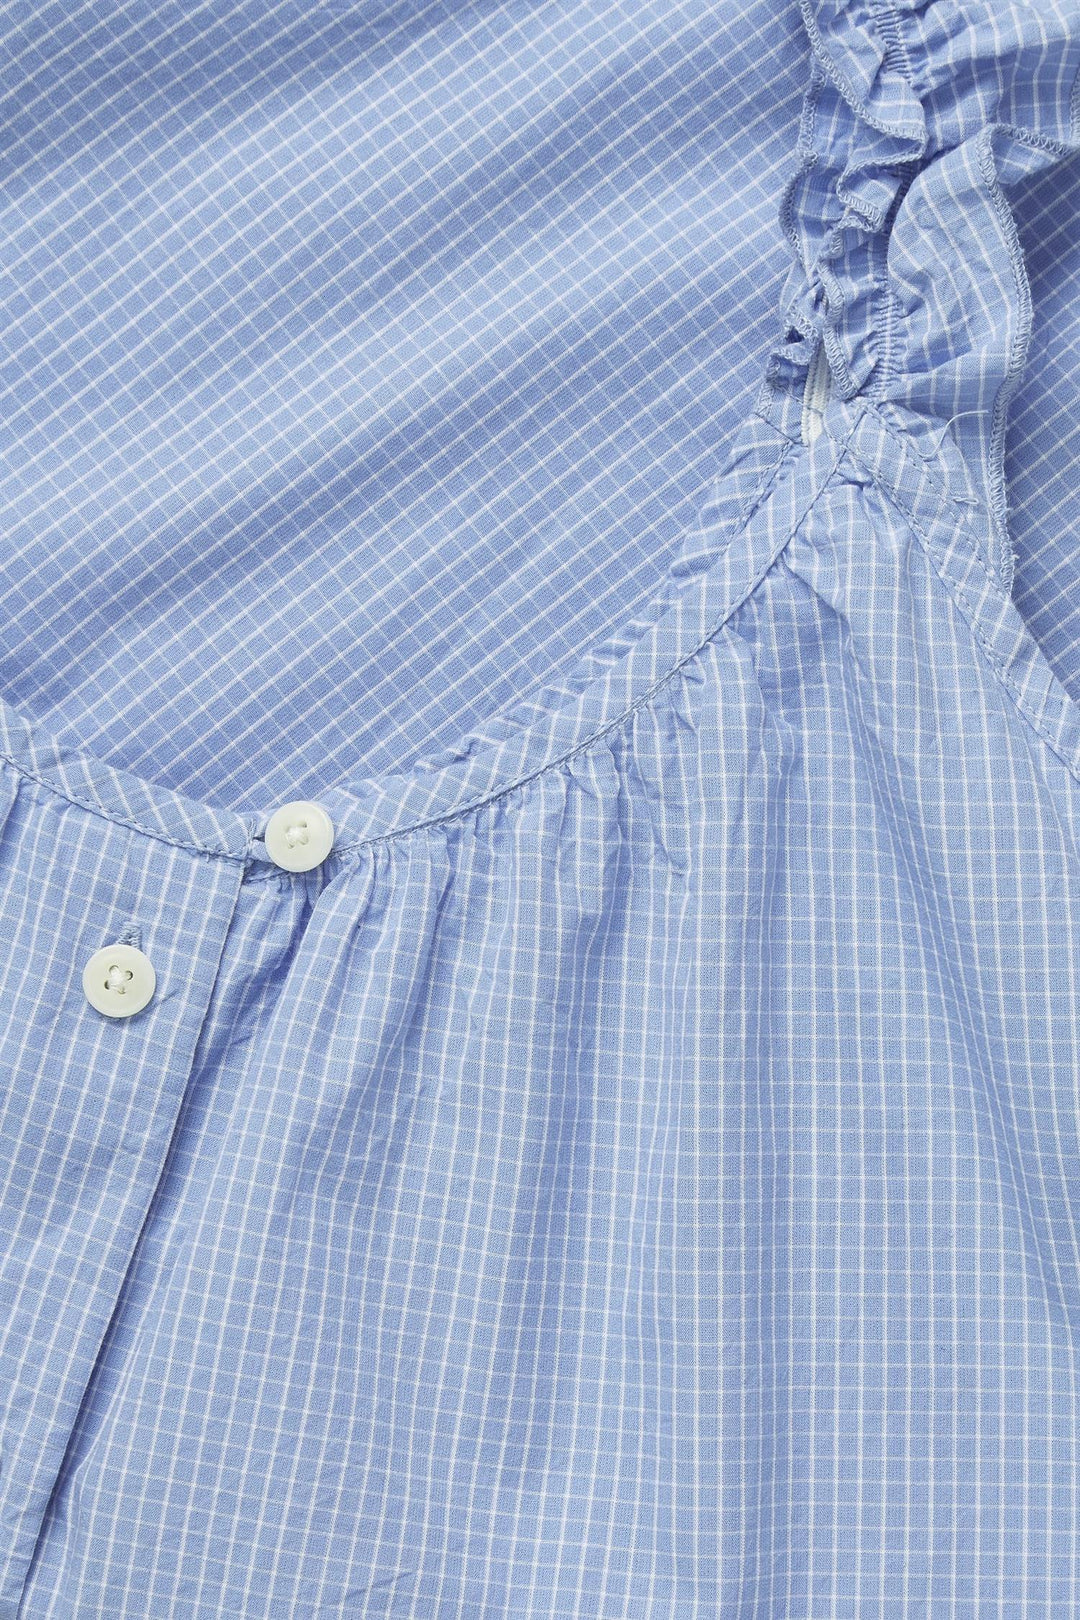 AIAYU - FRILL TOP CHECK MIX BLUE - Dale